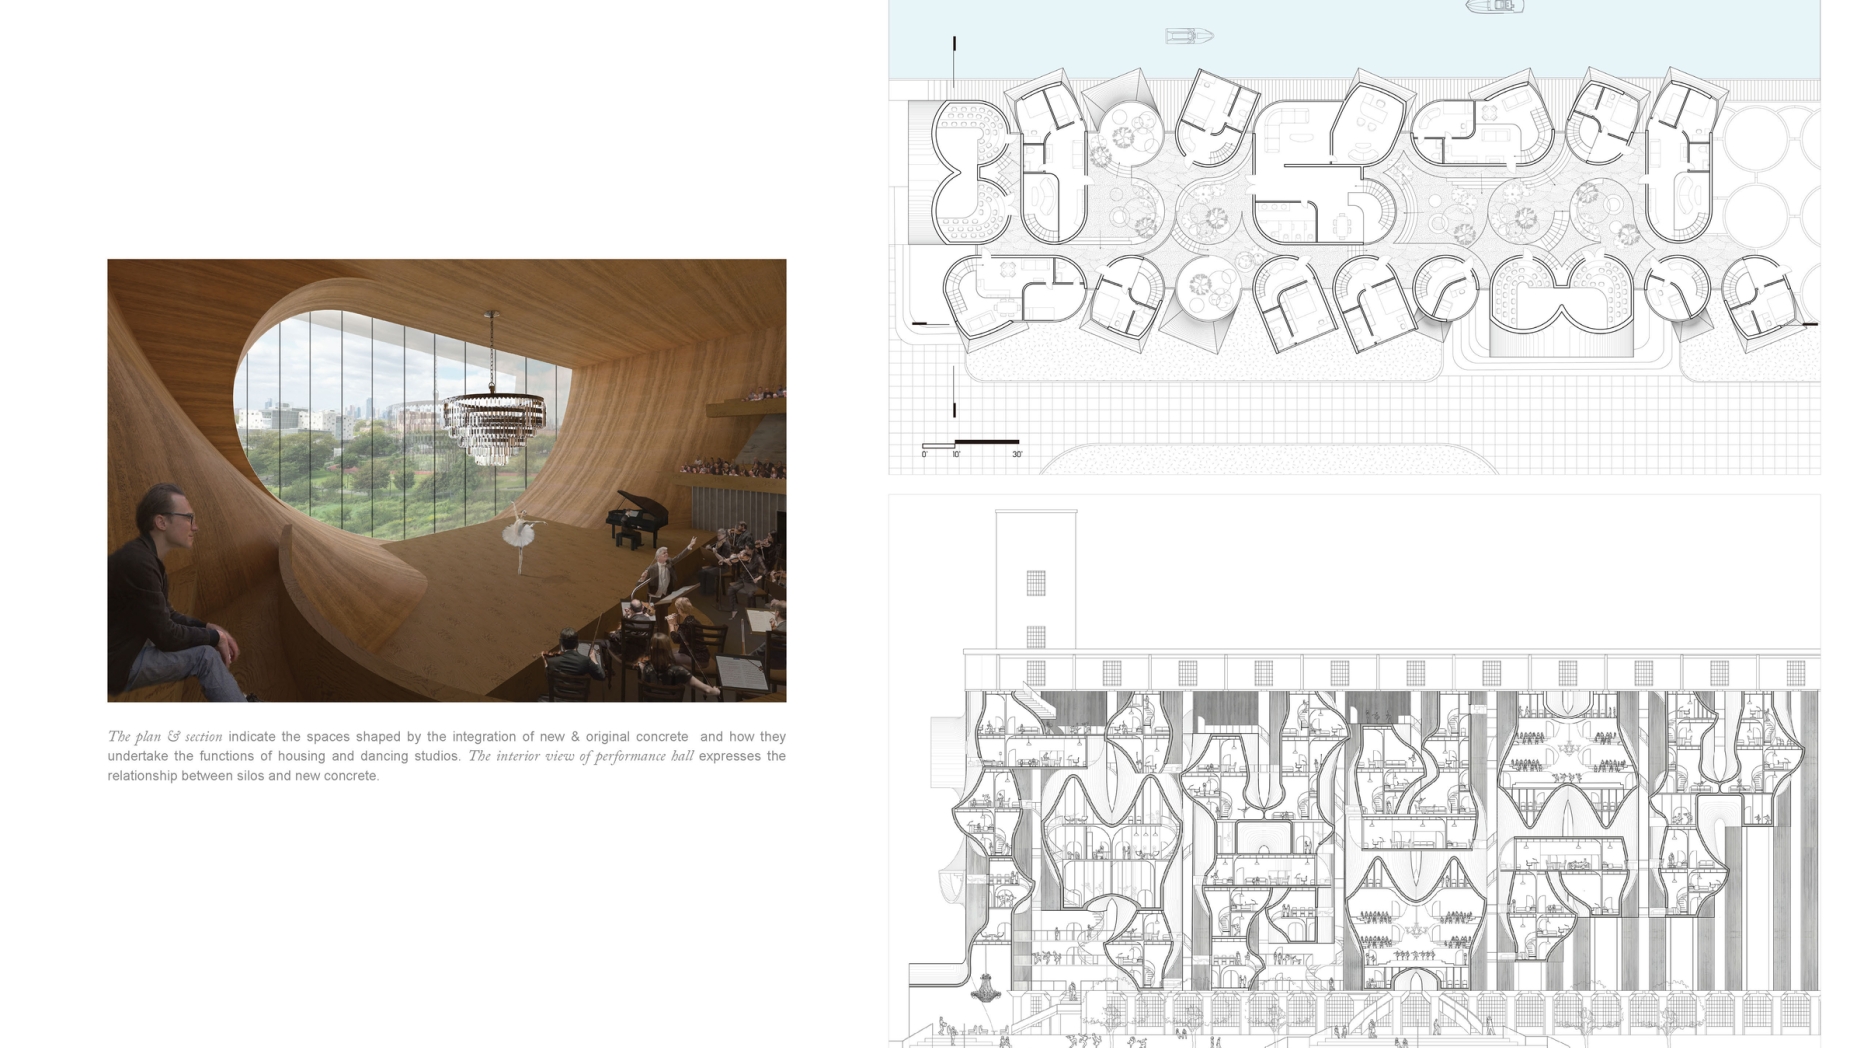 Floor plan and interior view of room with curving wooden panels 